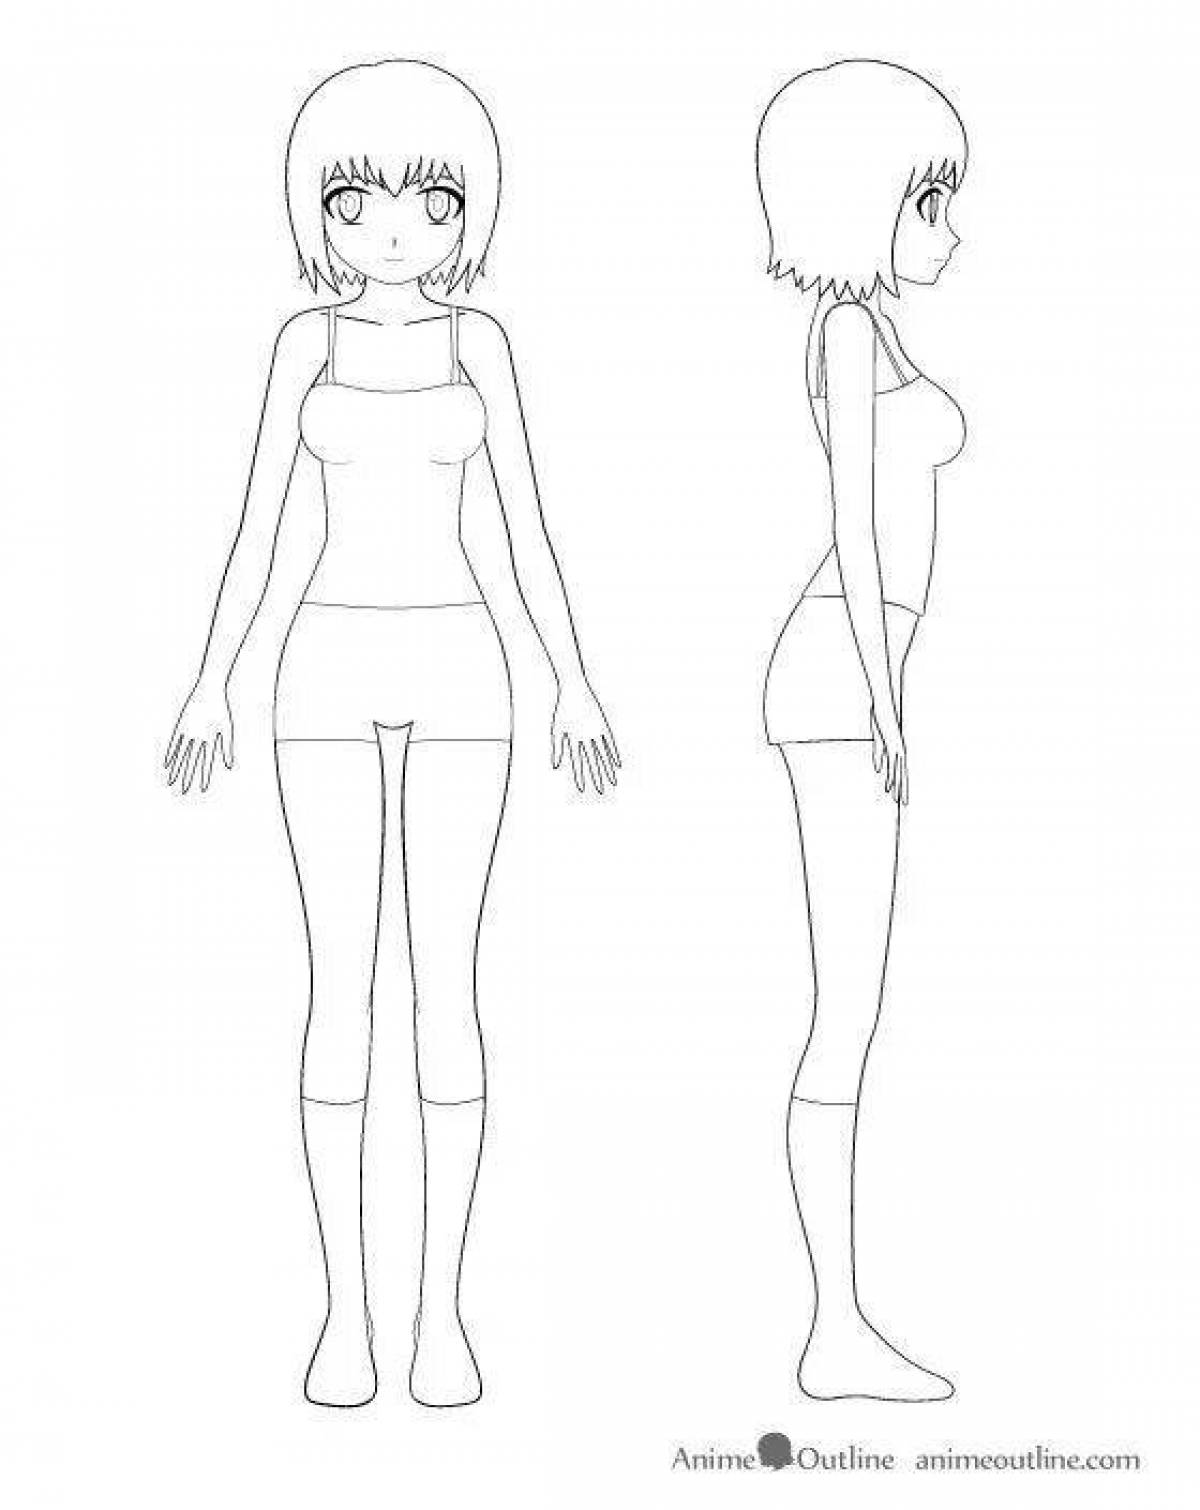 Delightful anime body coloring page